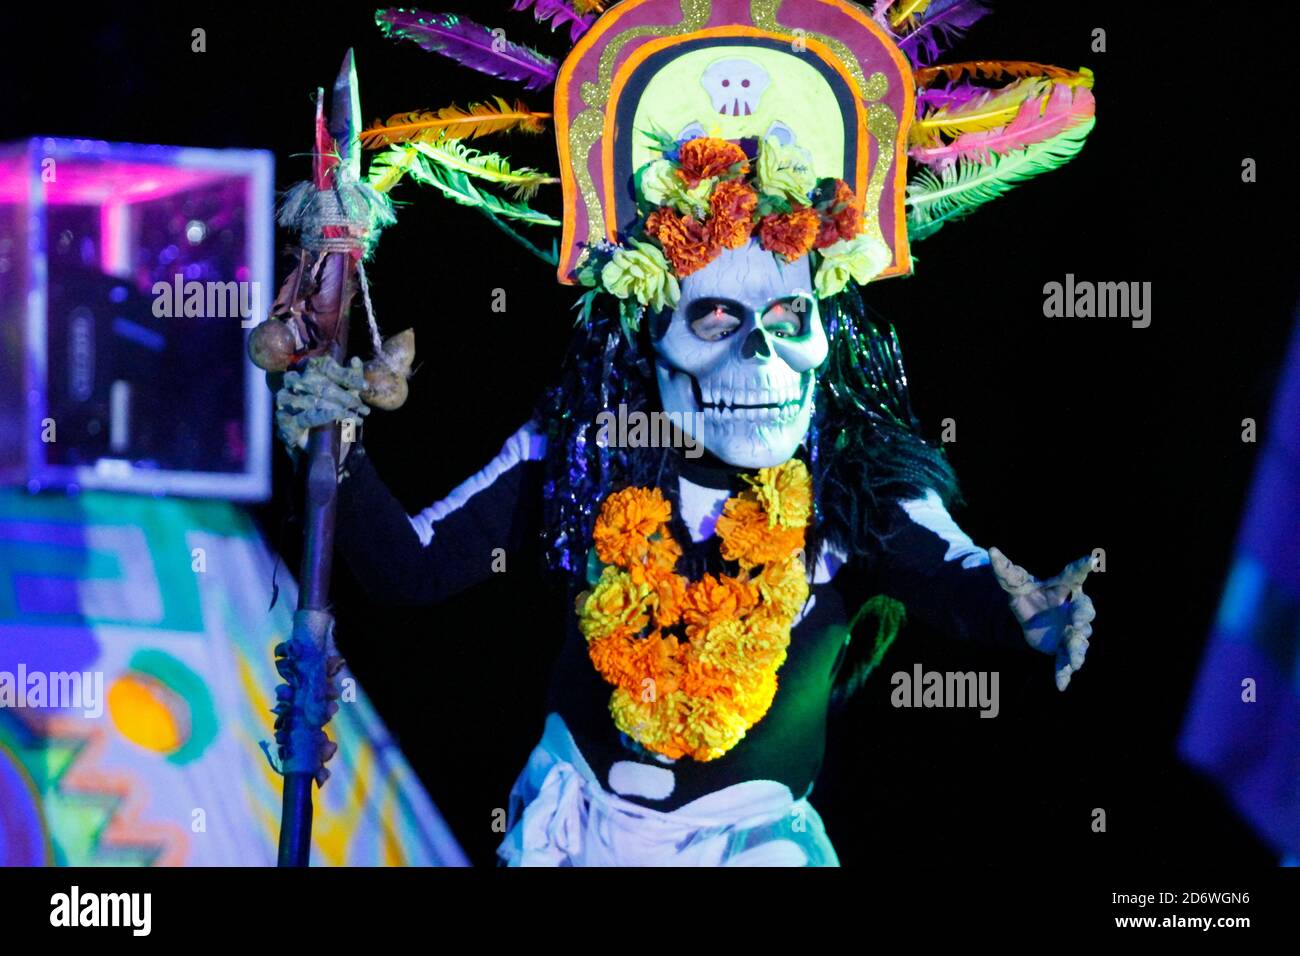 Non Exclusive: MEXICO CITY, MEXICO - OCTOBER 18: A person performs during the show of the Legend of the weeping woman (La llorona), who is a pre-hispa Stock Photo